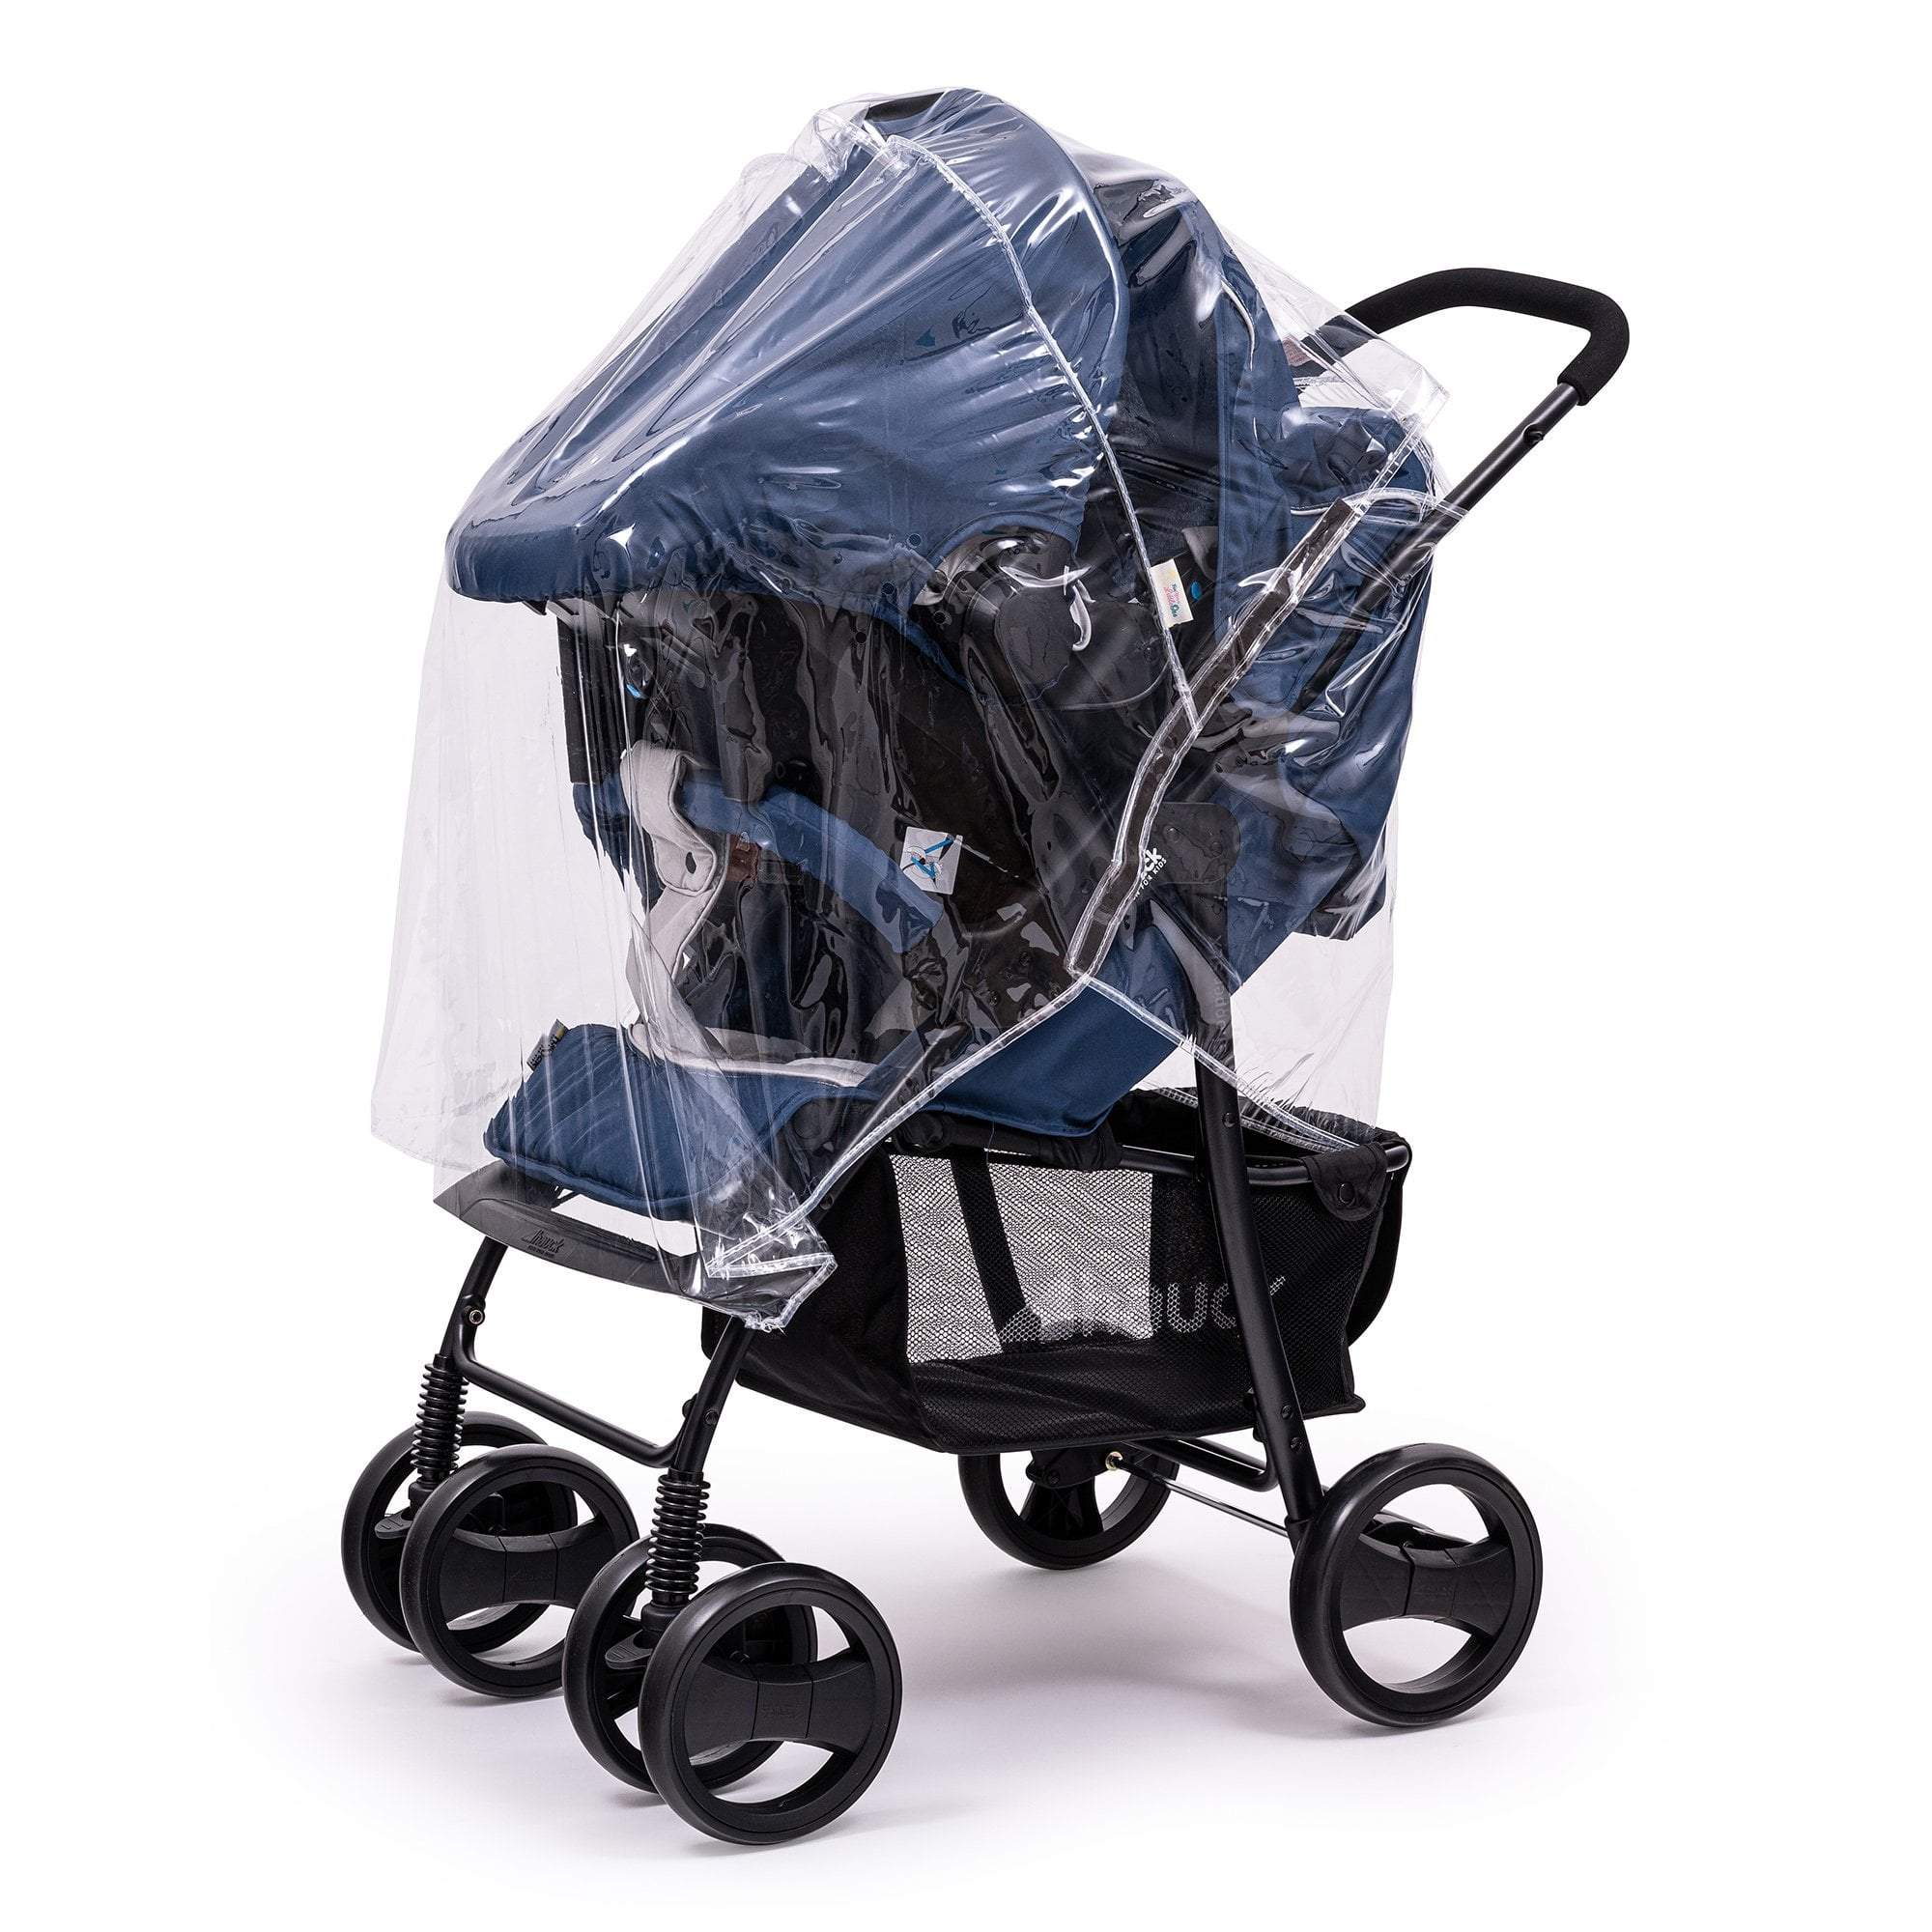 Travel System Raincover Compatible with Hartan - Fits All Models - For Your Little One